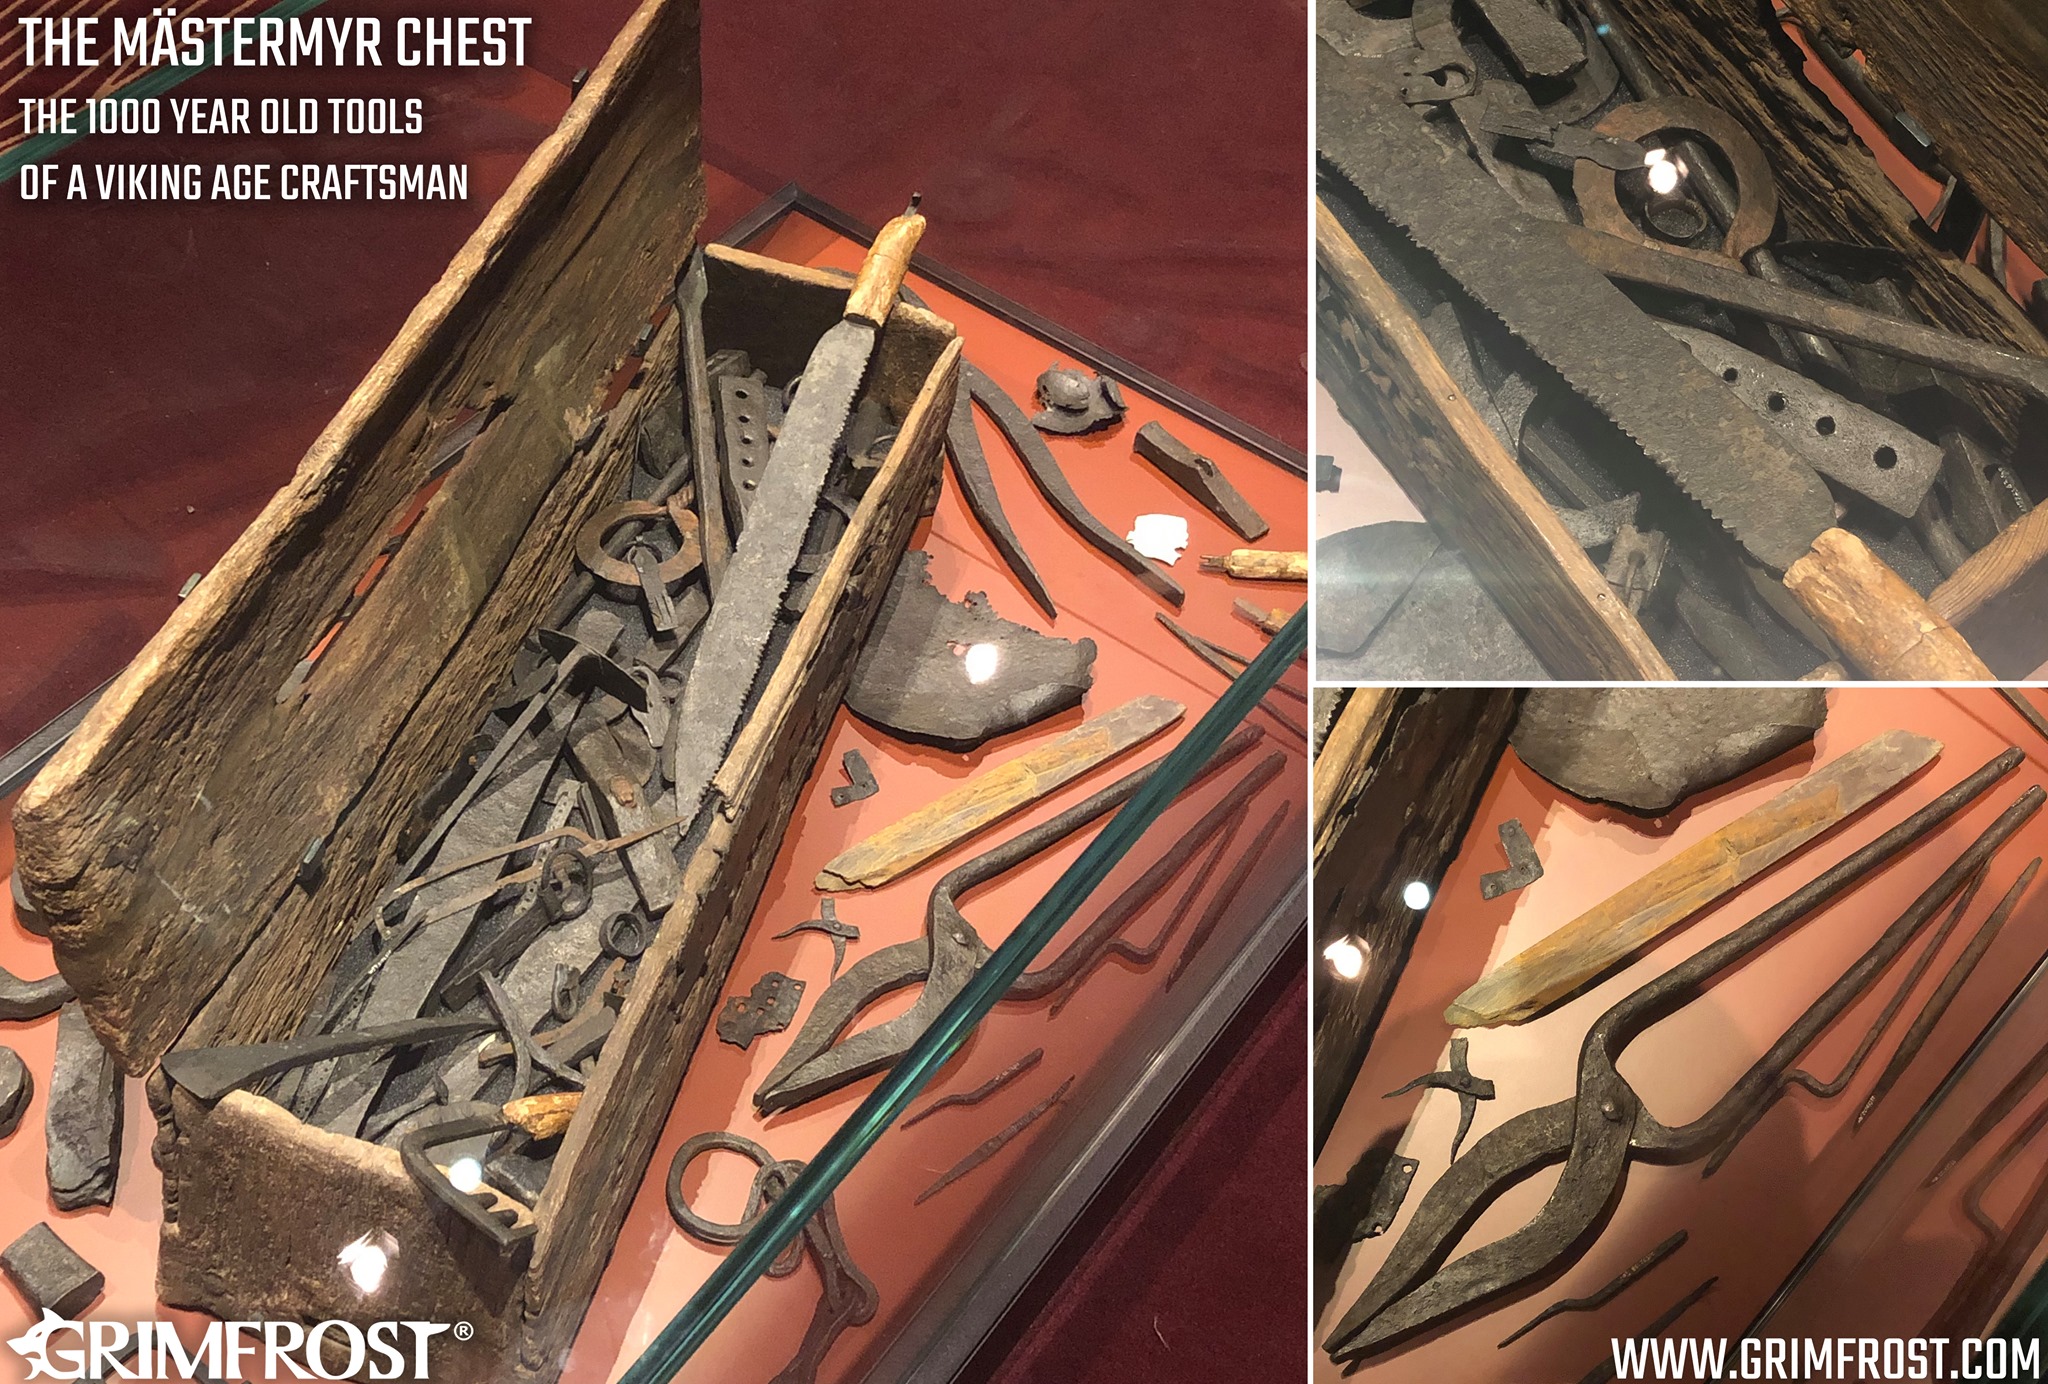 Collage of three photos. An oblong chest with tools inside and close-ups of the tools, including a pair of scissors, weighing scales, a saw, axes, an anvil, pots, forging hammers, pliers and chains.